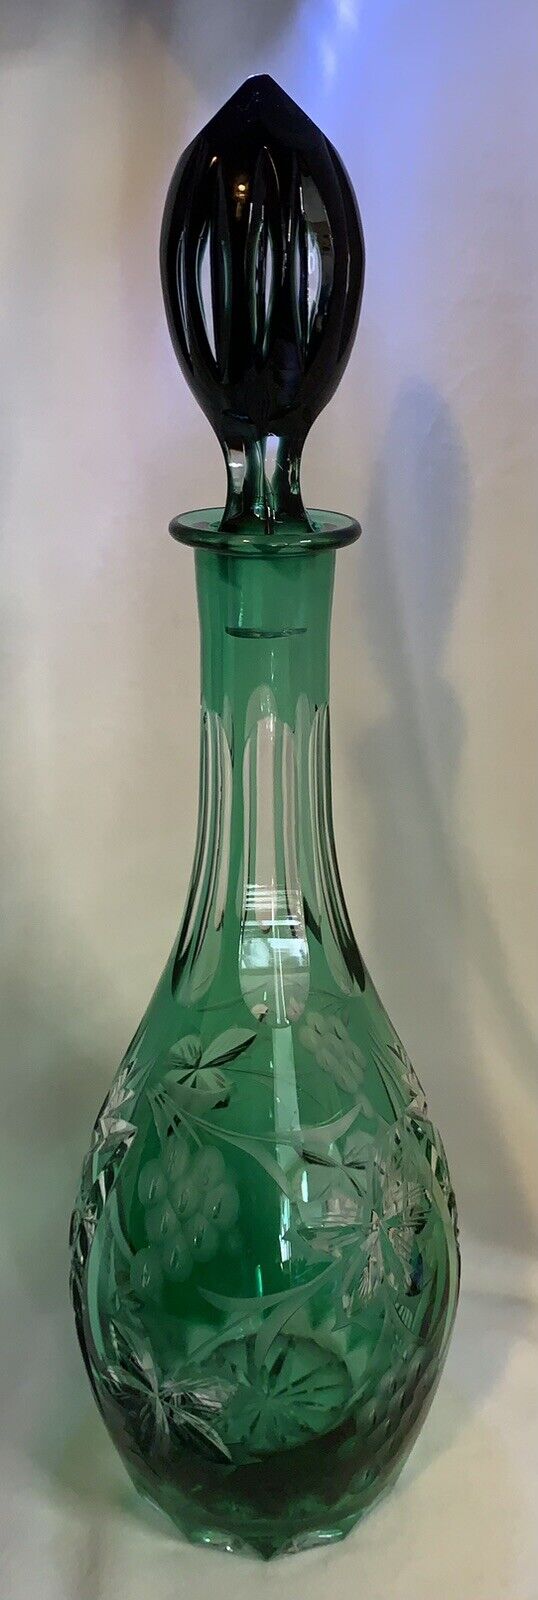 Vtg Beautiful Bohemian Dresden 24% Lead Crystal Decanter Hand Cut Green To Clear